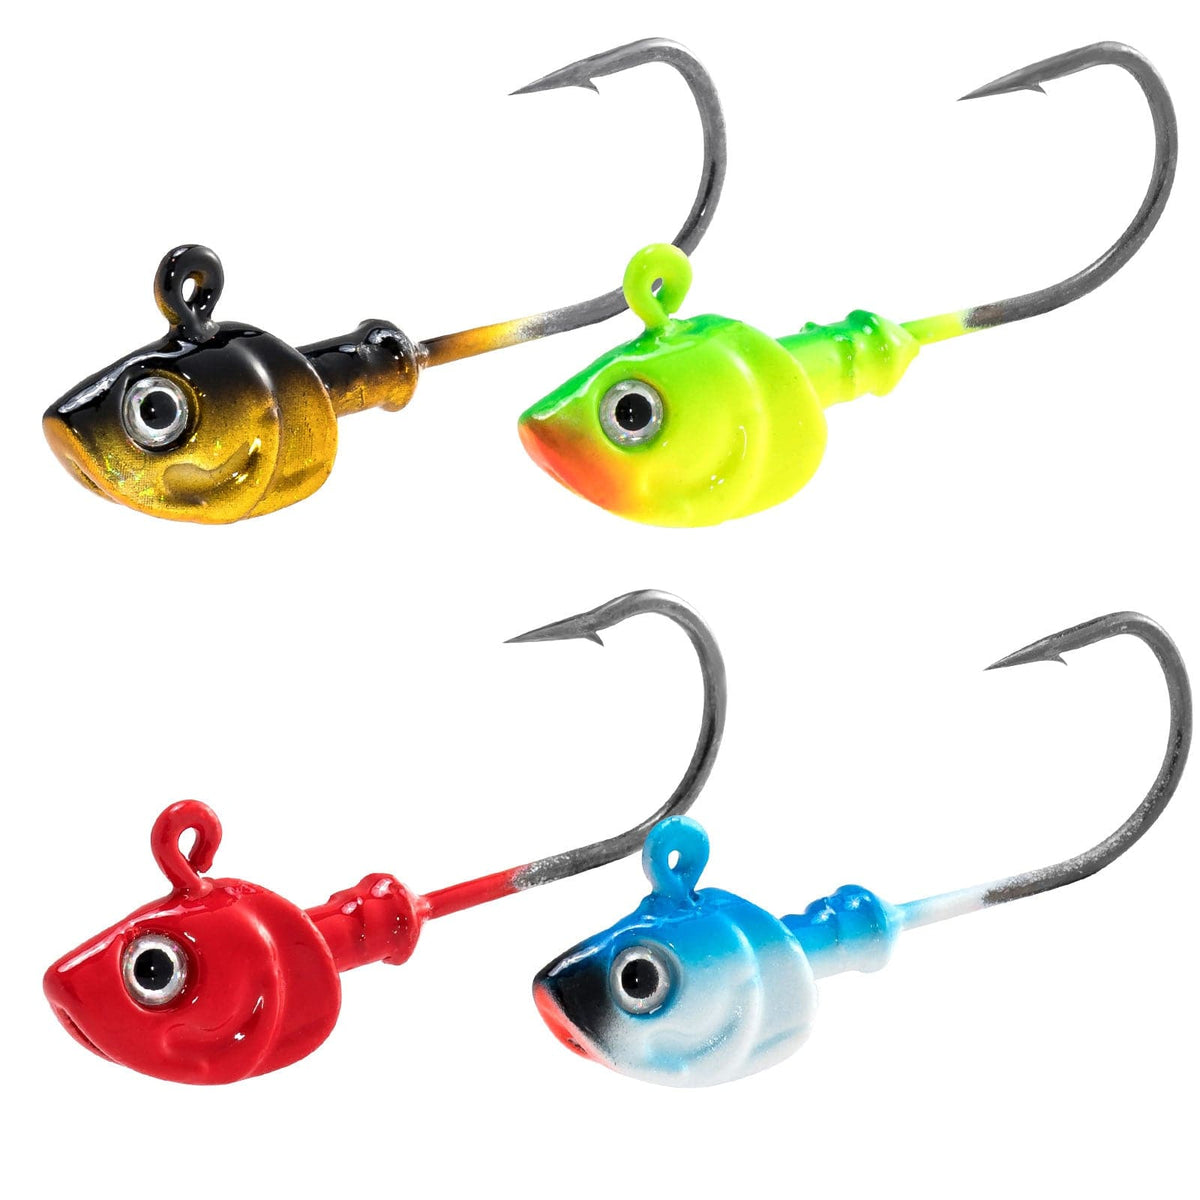 Fishging Jig Heads - Ultra Minnow Jig Heads 0.59oz-1oz for Saltwater – Dr. Fish Tackles